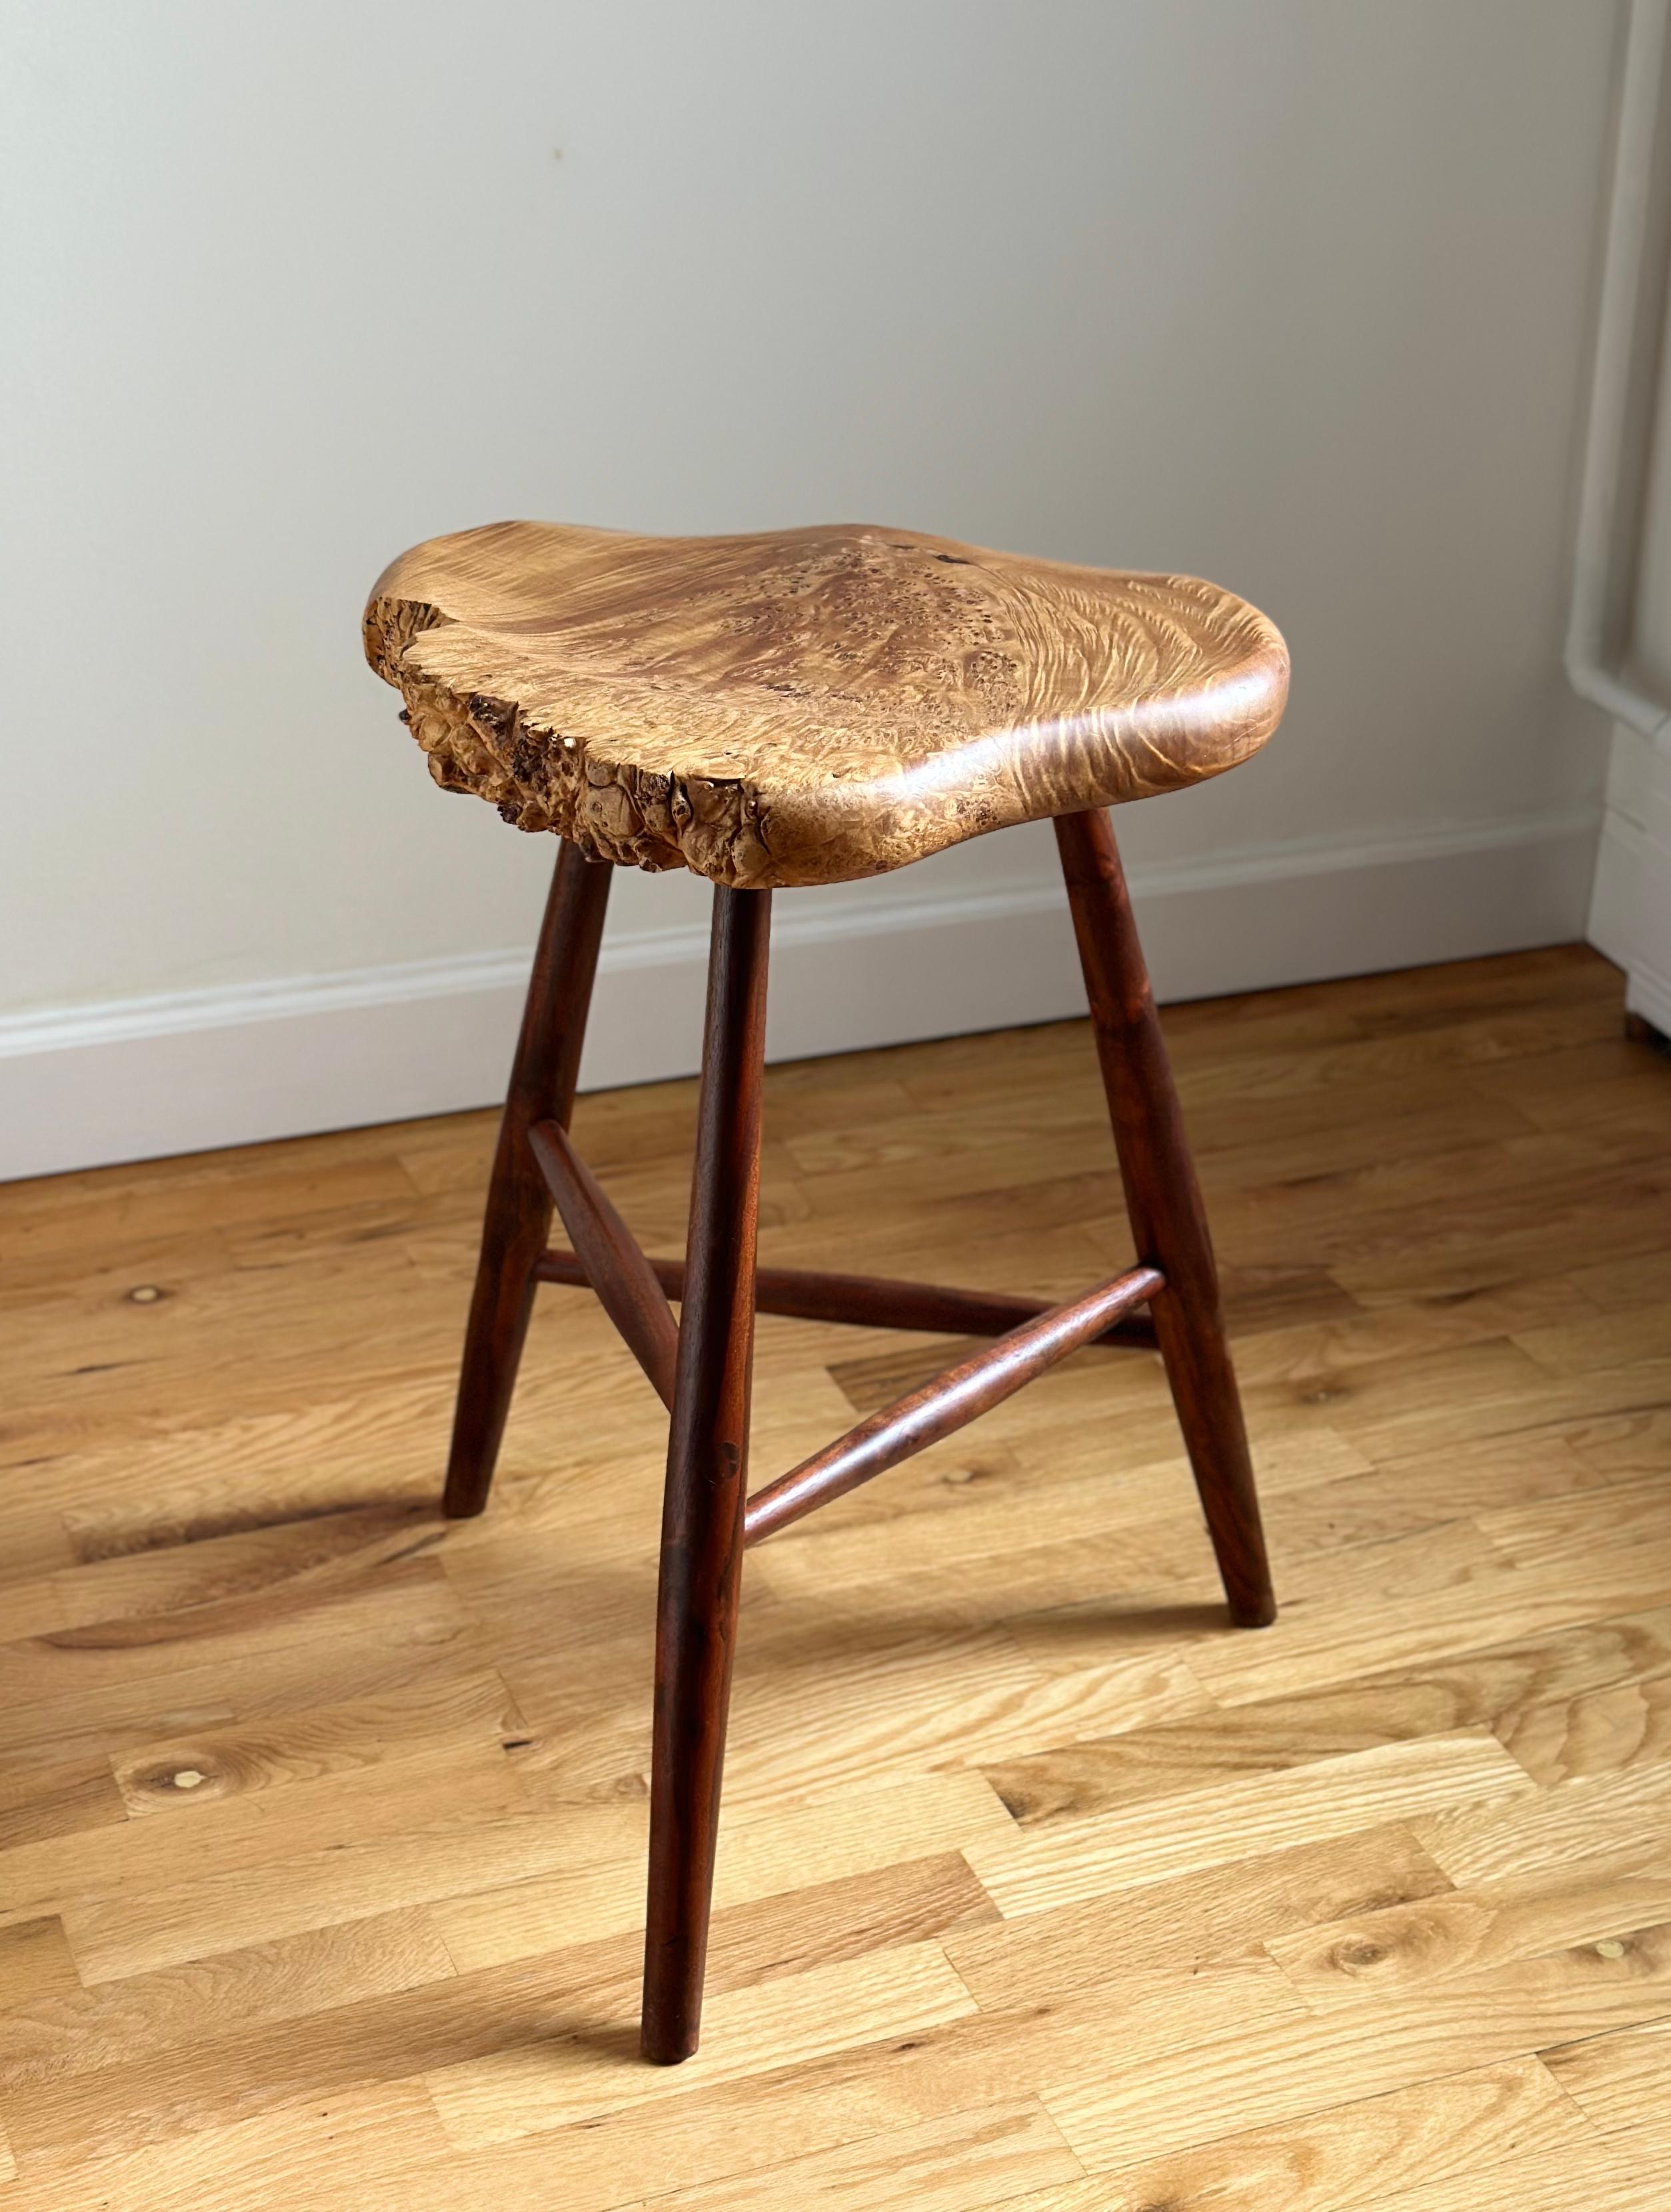 American Studio Live Edge Stool in Walnut and Maple Burl by Michael Elkan In Good Condition For Sale In Brooklyn, NY